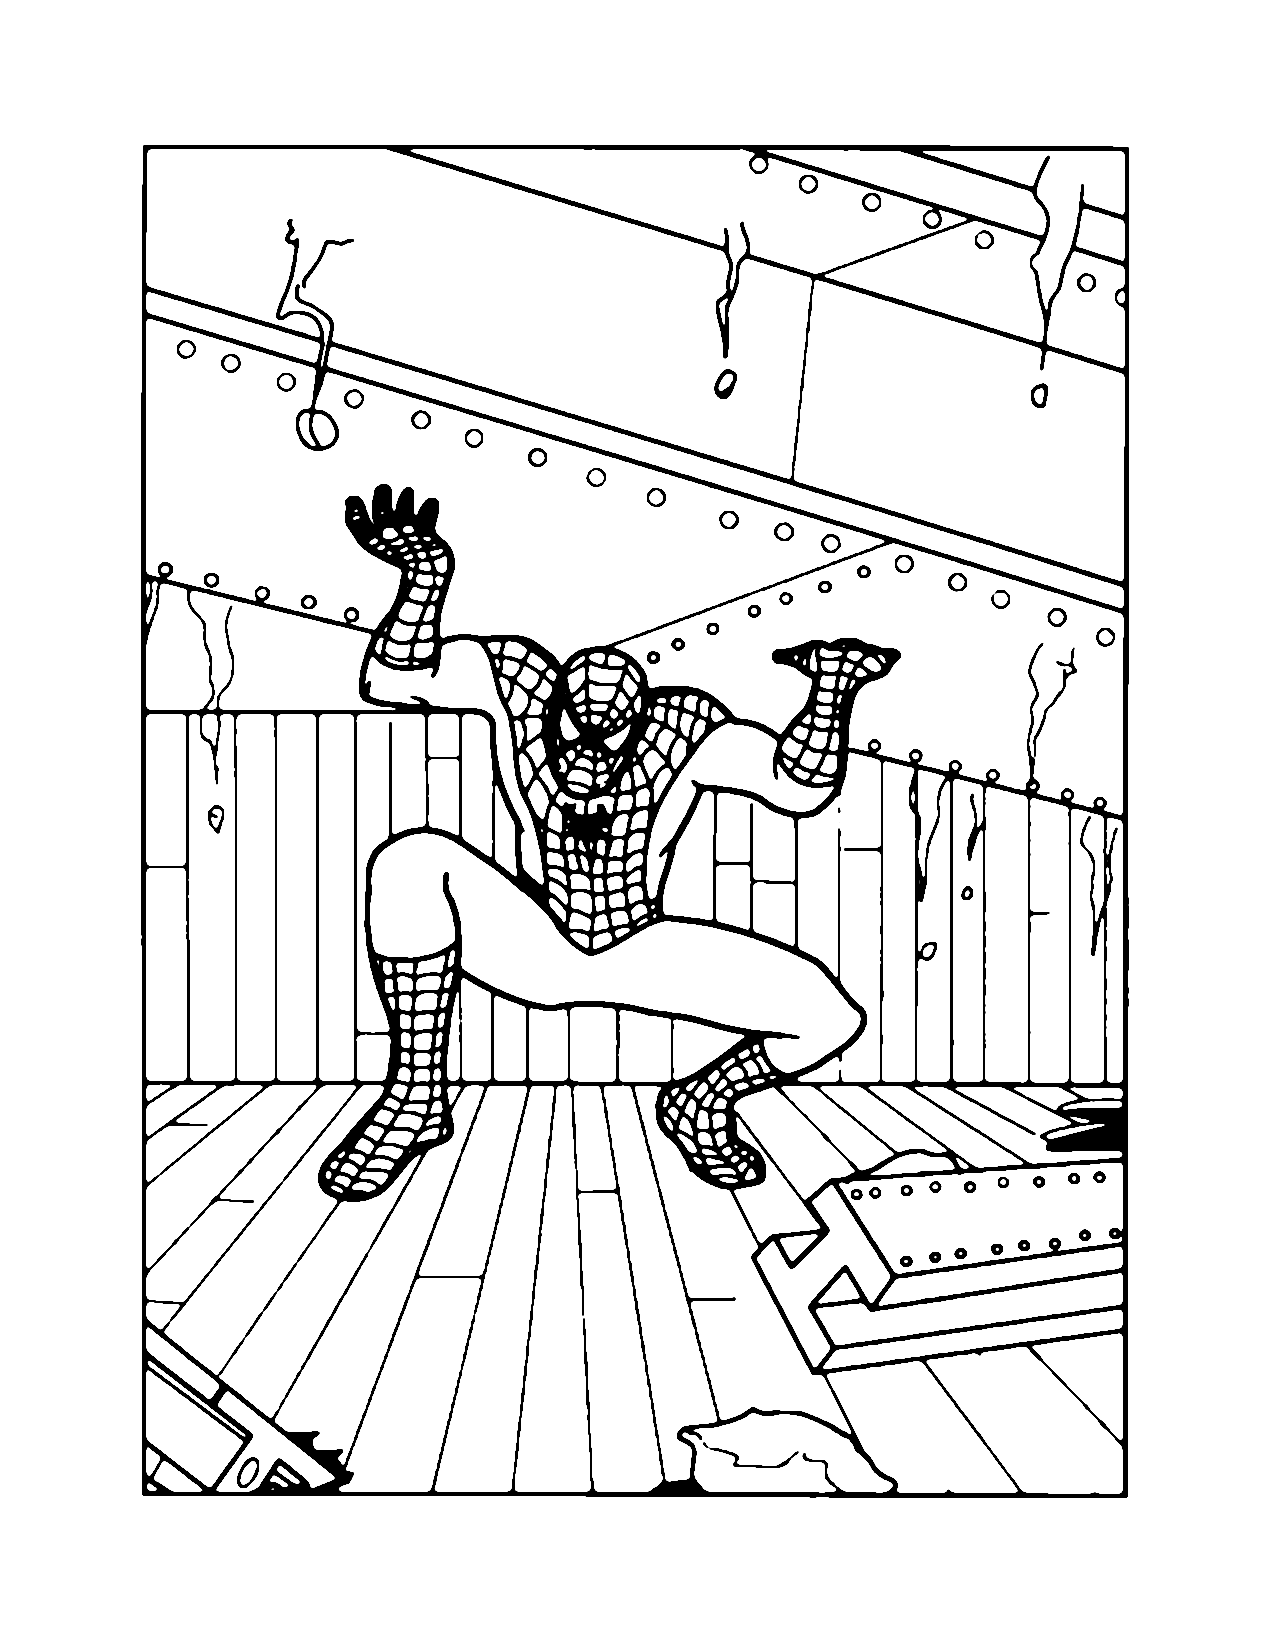 Spiderman Catching Falling Building Coloring Page